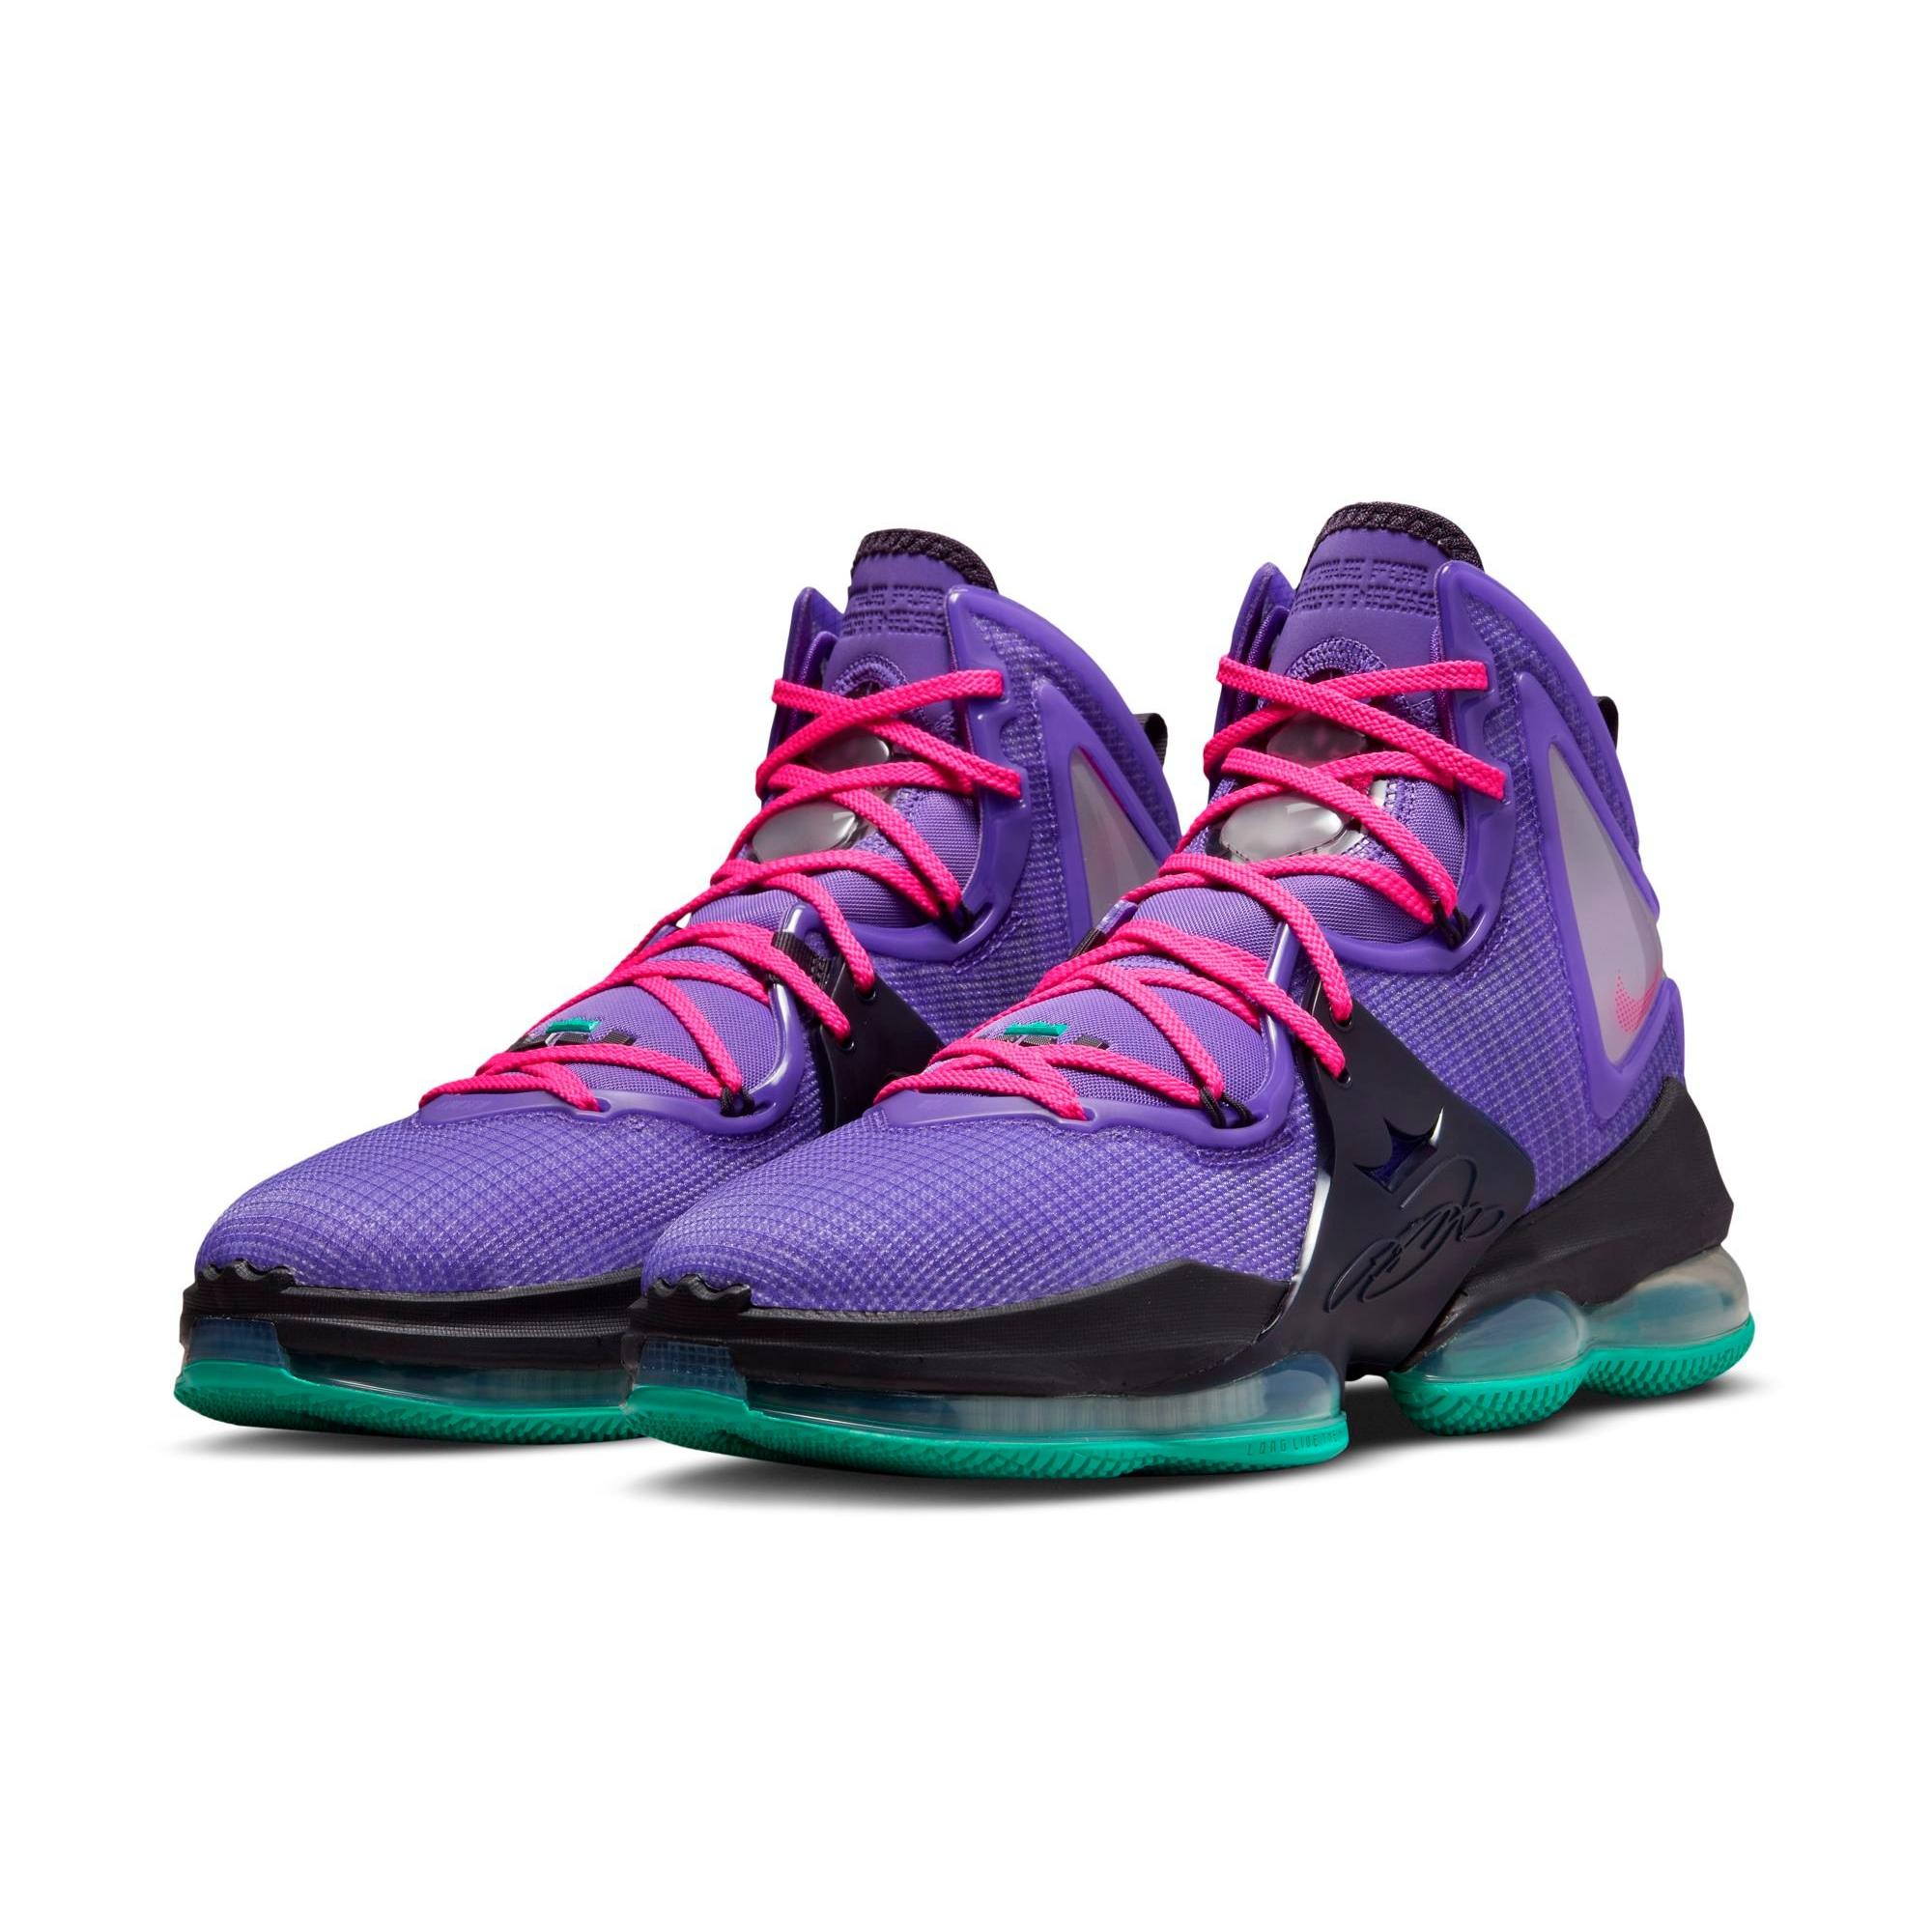 Sneakers Release – The LeBron 19 “DJ Bron” Wild  Berry/Hyper Pink/Cave Purple Men’s Basketball Shoe Dropping 6/25